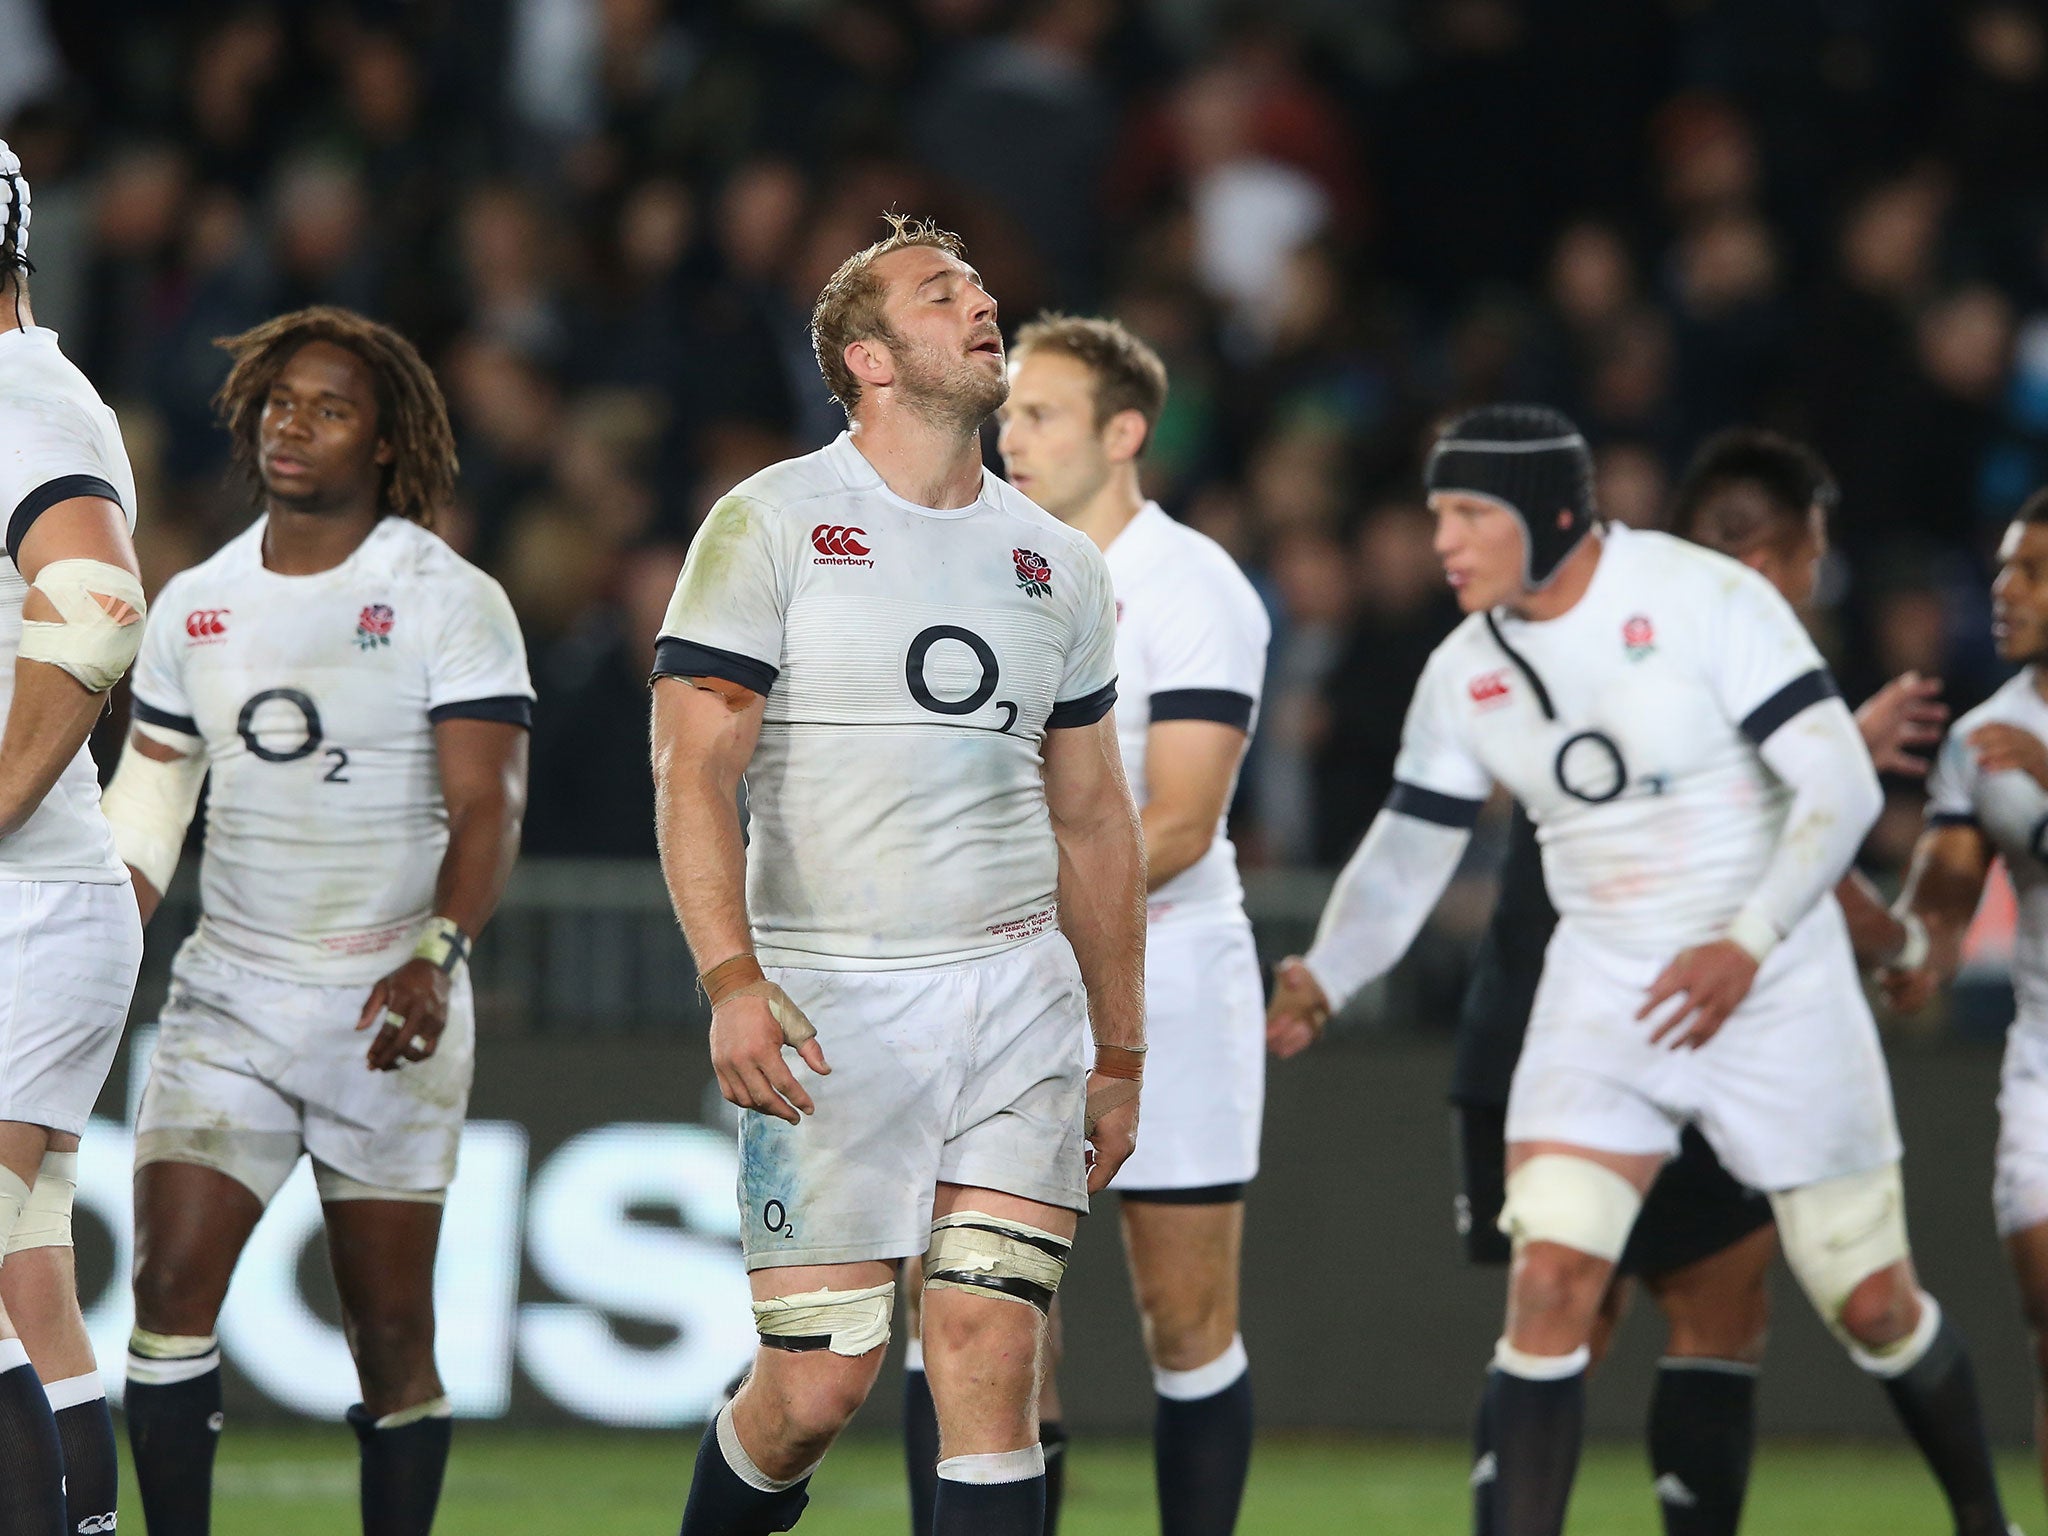 England captain Chris Robshaw looks dejected after the final whistle following the narrow 20-15 loss to New Zealand